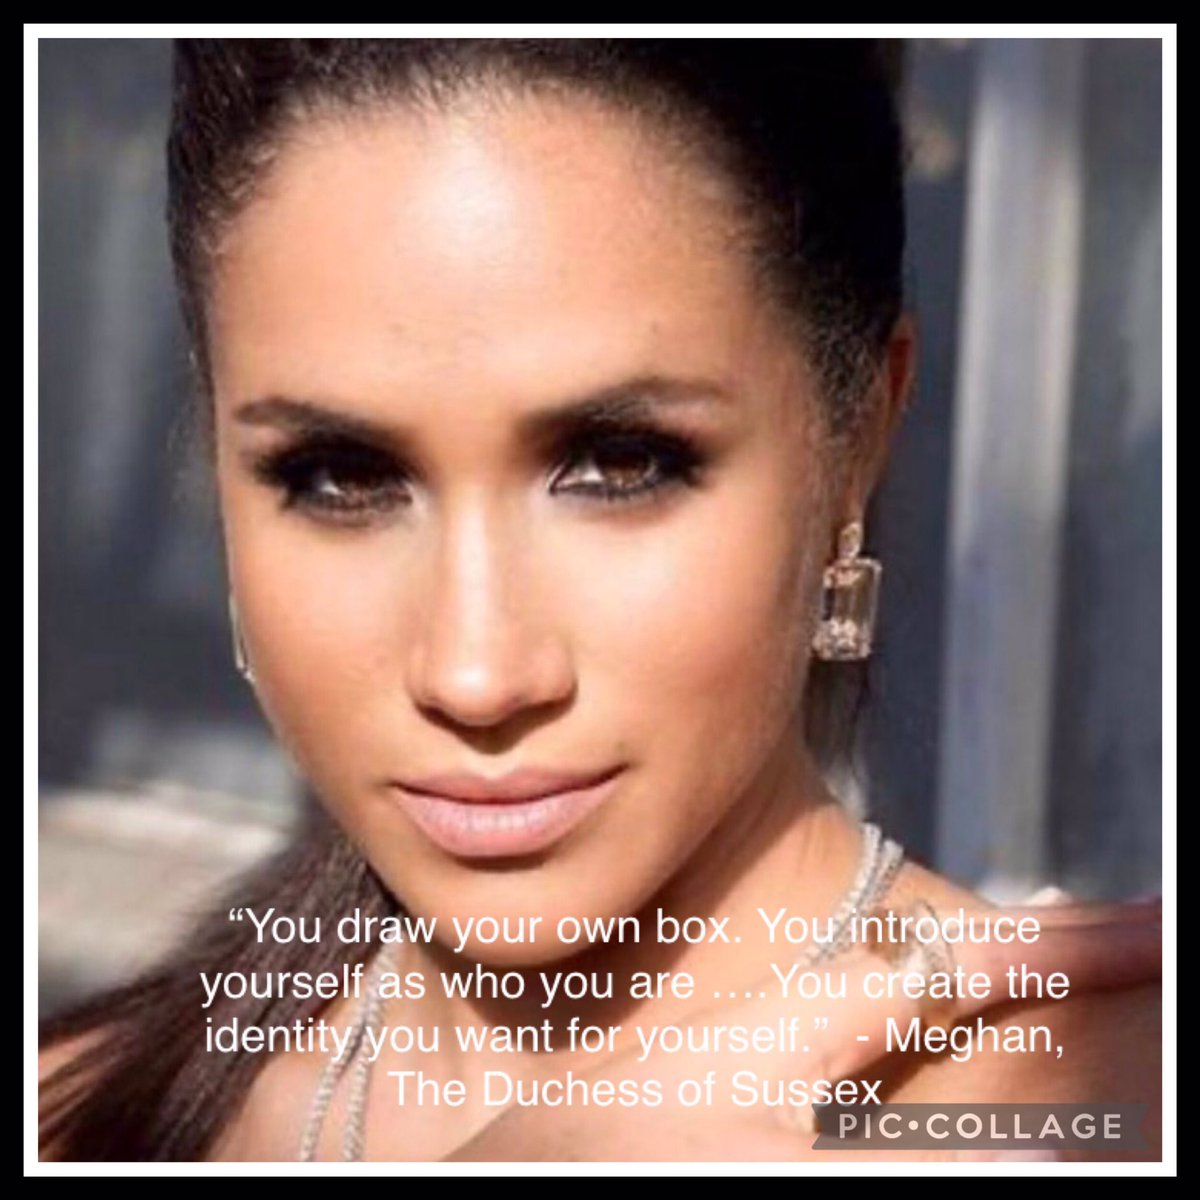 “You draw your own box. You introduce yourself as who you are ….You create the identity you want for yourself.”  - Meghan, The Duchess of Sussex 

Create your own identity, rather than let others, define it for you. Just ‘be yourself’. Best way

#DuchessMeghan
#WeLoveYouMeghan